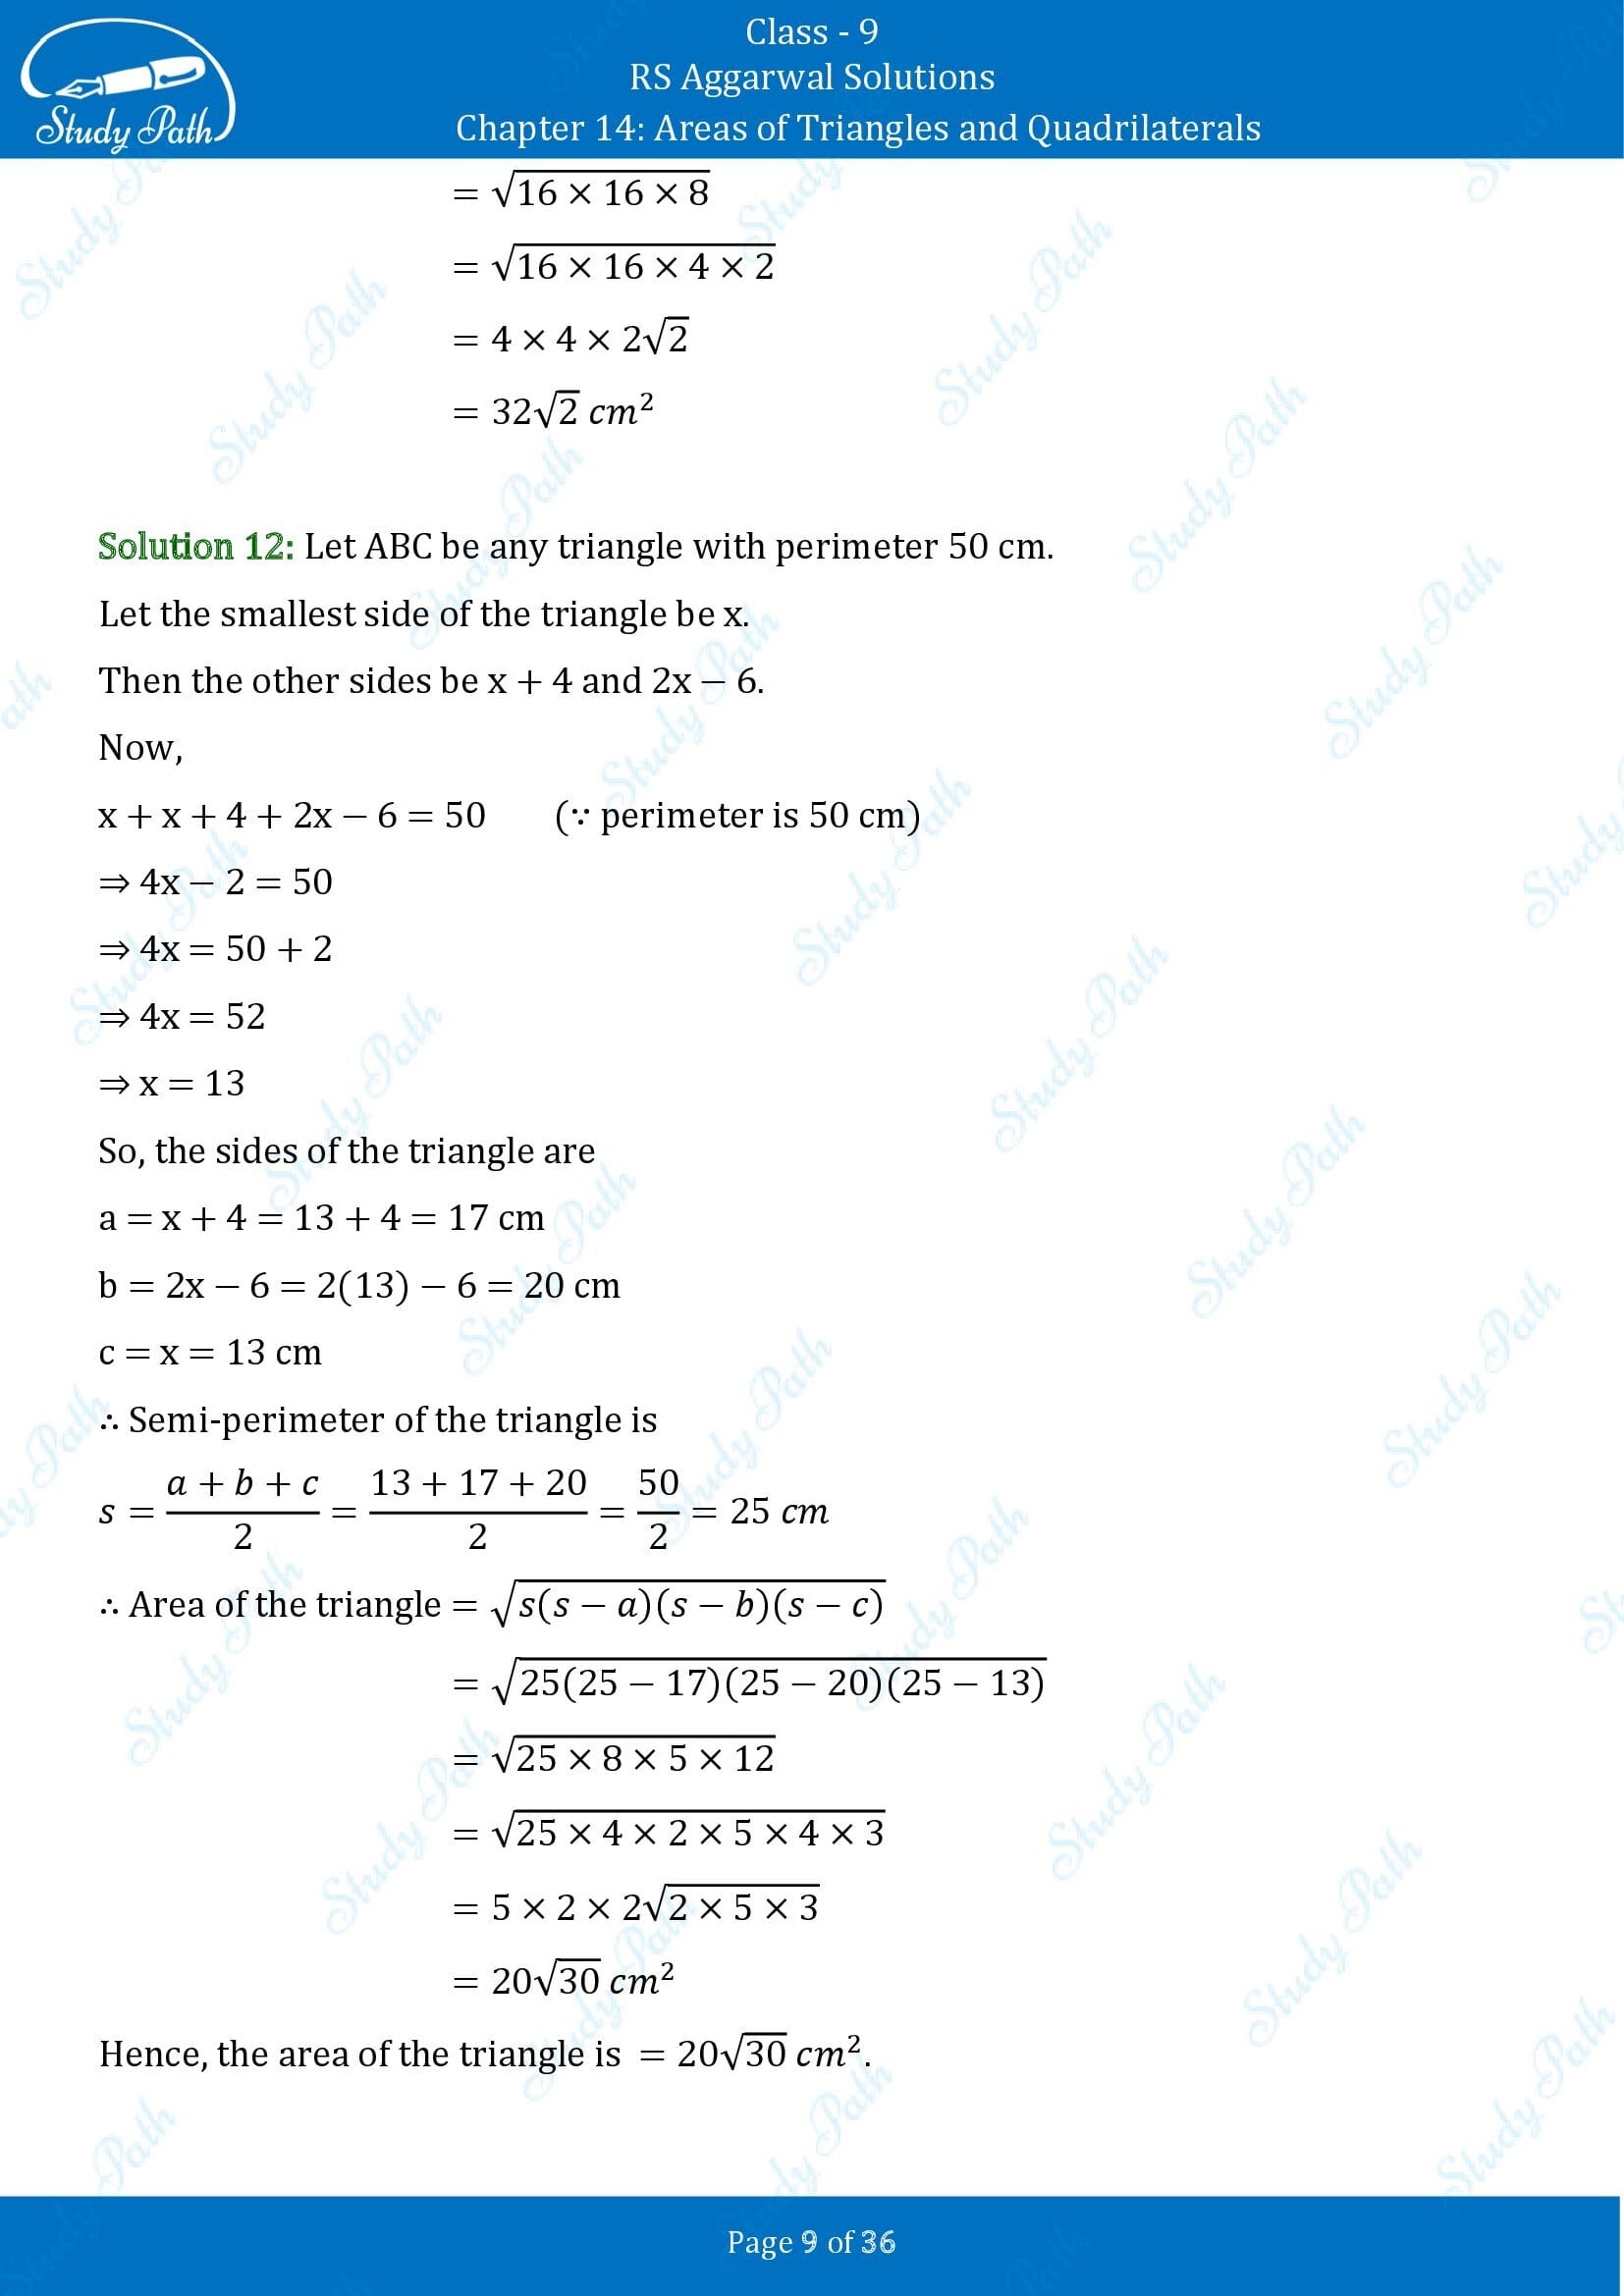 RS Aggarwal Solutions Class 9 Chapter 14 Areas of Triangles and Quadrilaterals Exercise 14 00009